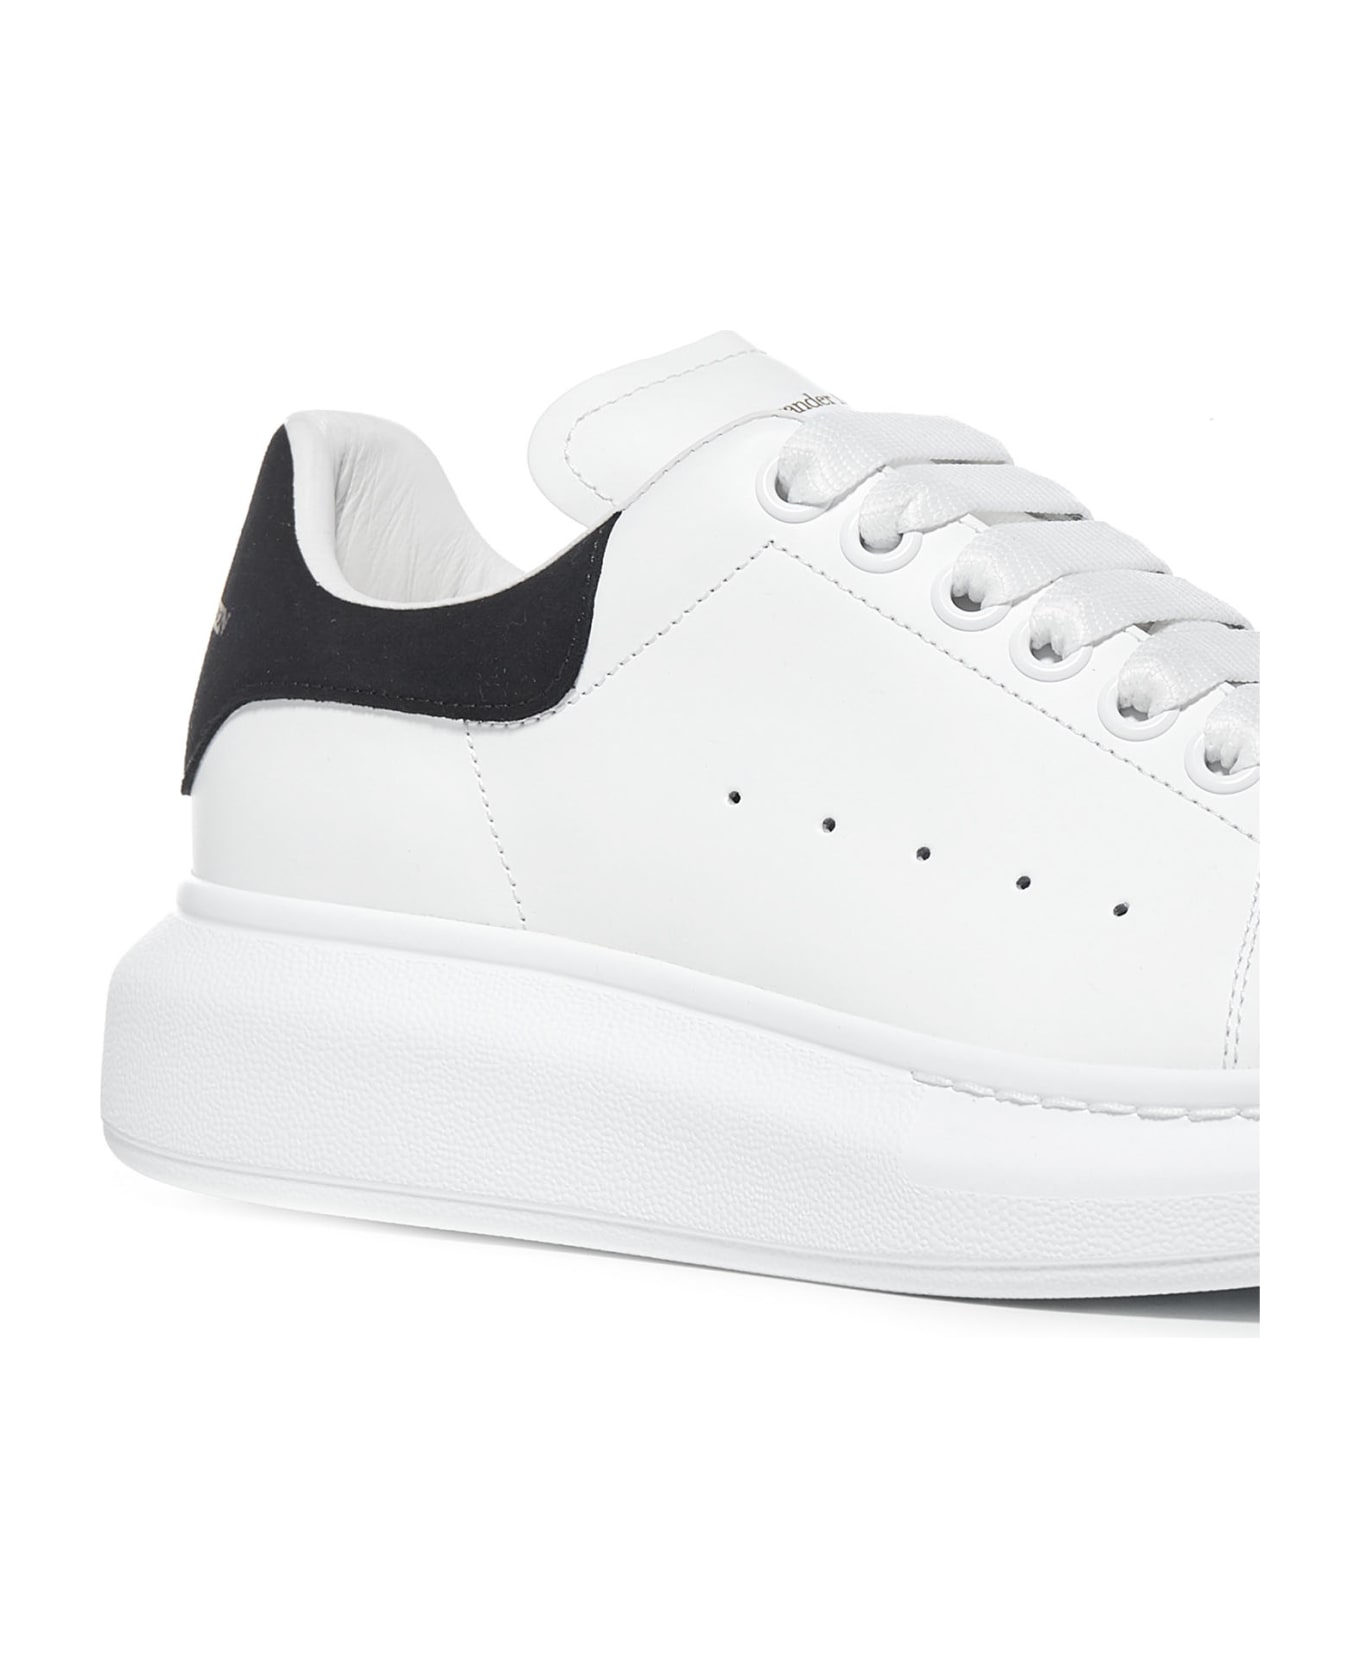 Alexander McQueen Oversized Sneakers In Leather With Contrasting Heel Tab - White Black スニーカー